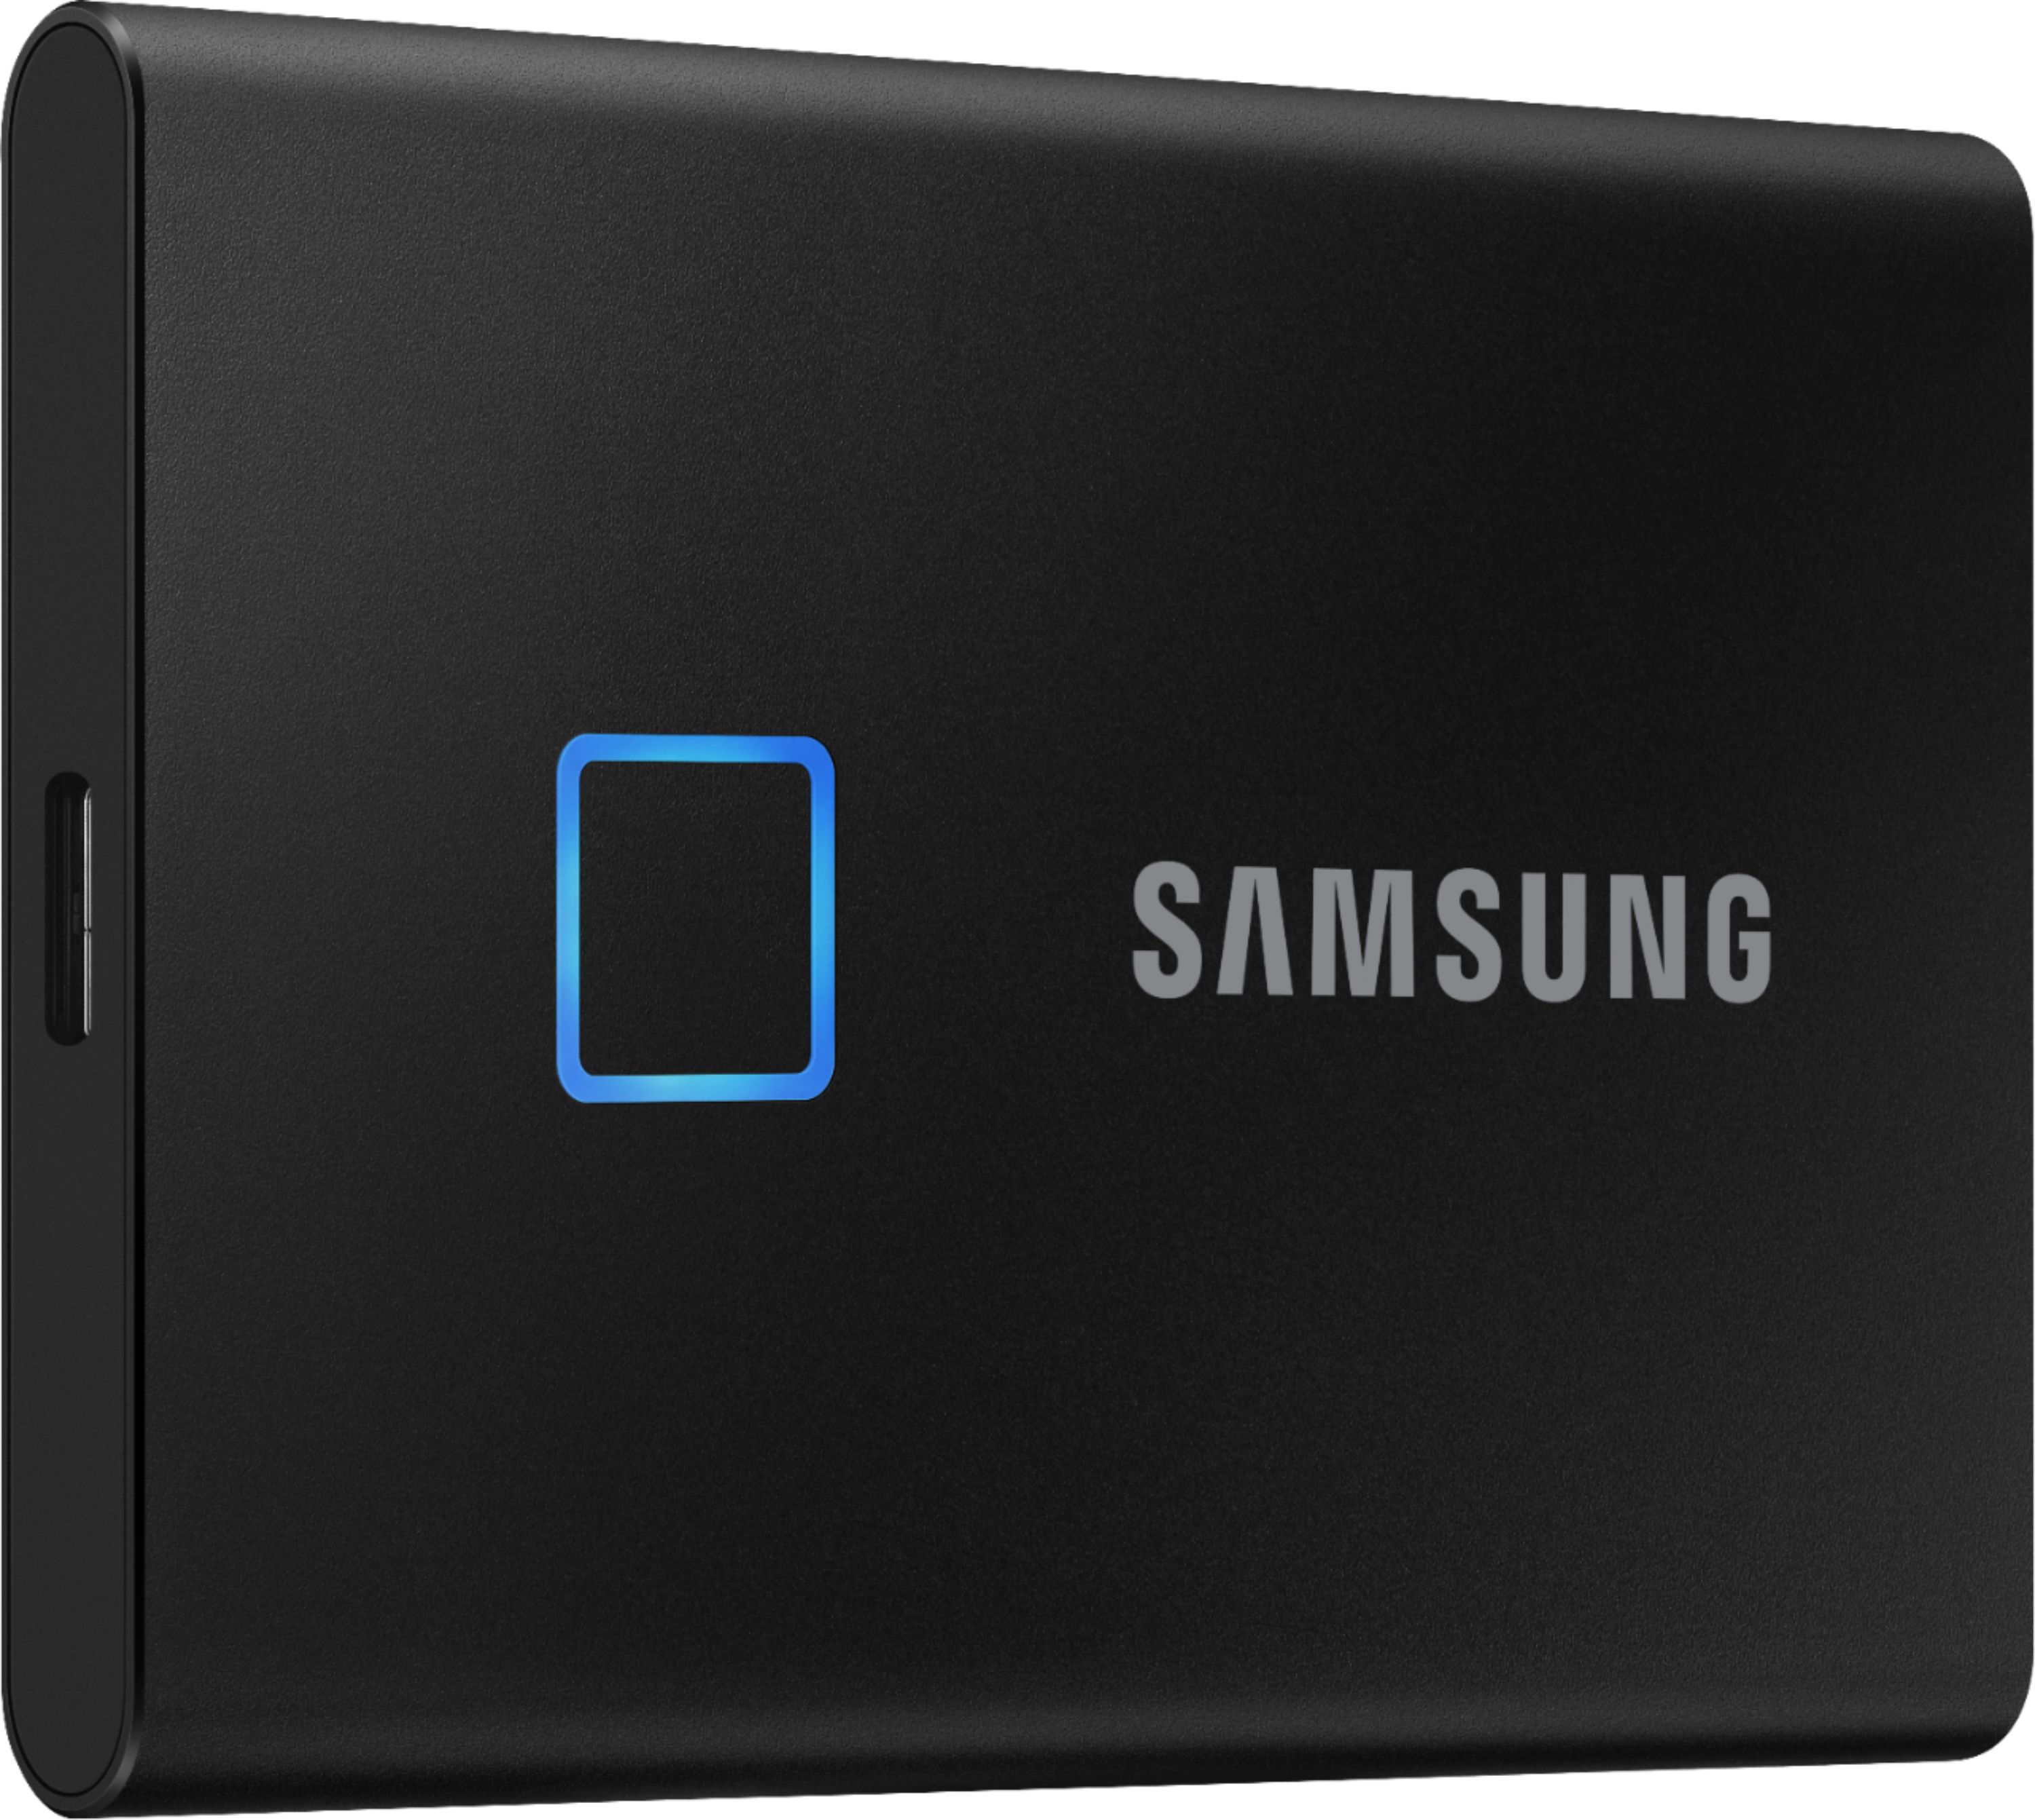 Angle View: Samsung - Geek Squad Certified Refurbished T7 2TB External USB 3.2 Gen 2 Portable SSD with Hardware Encryption - Titan Gray